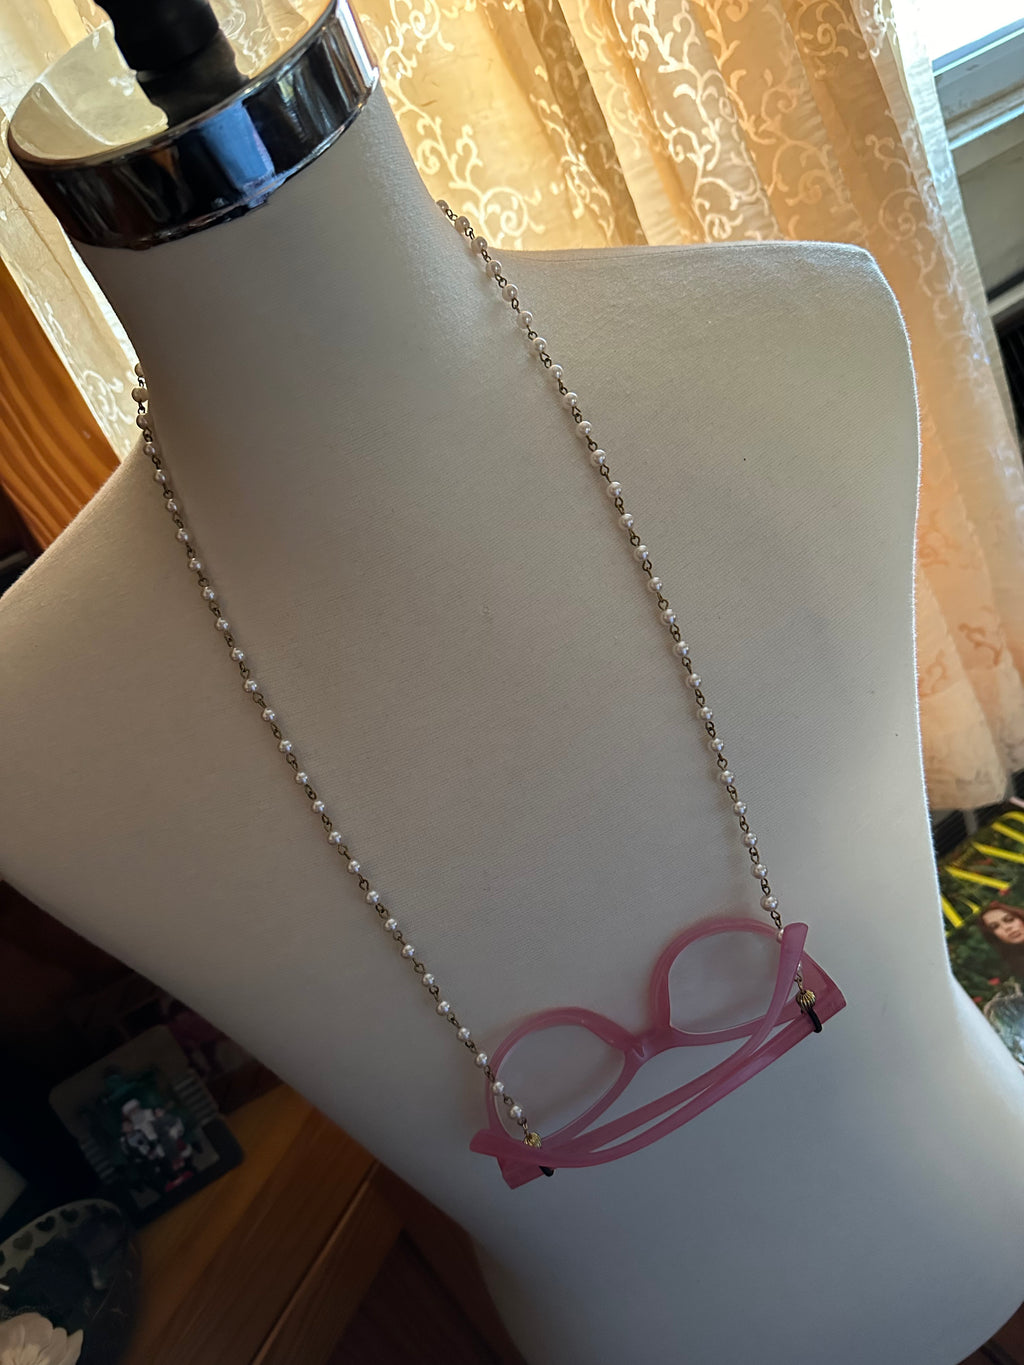 Eyeglasses Pearl Rosary Necklace